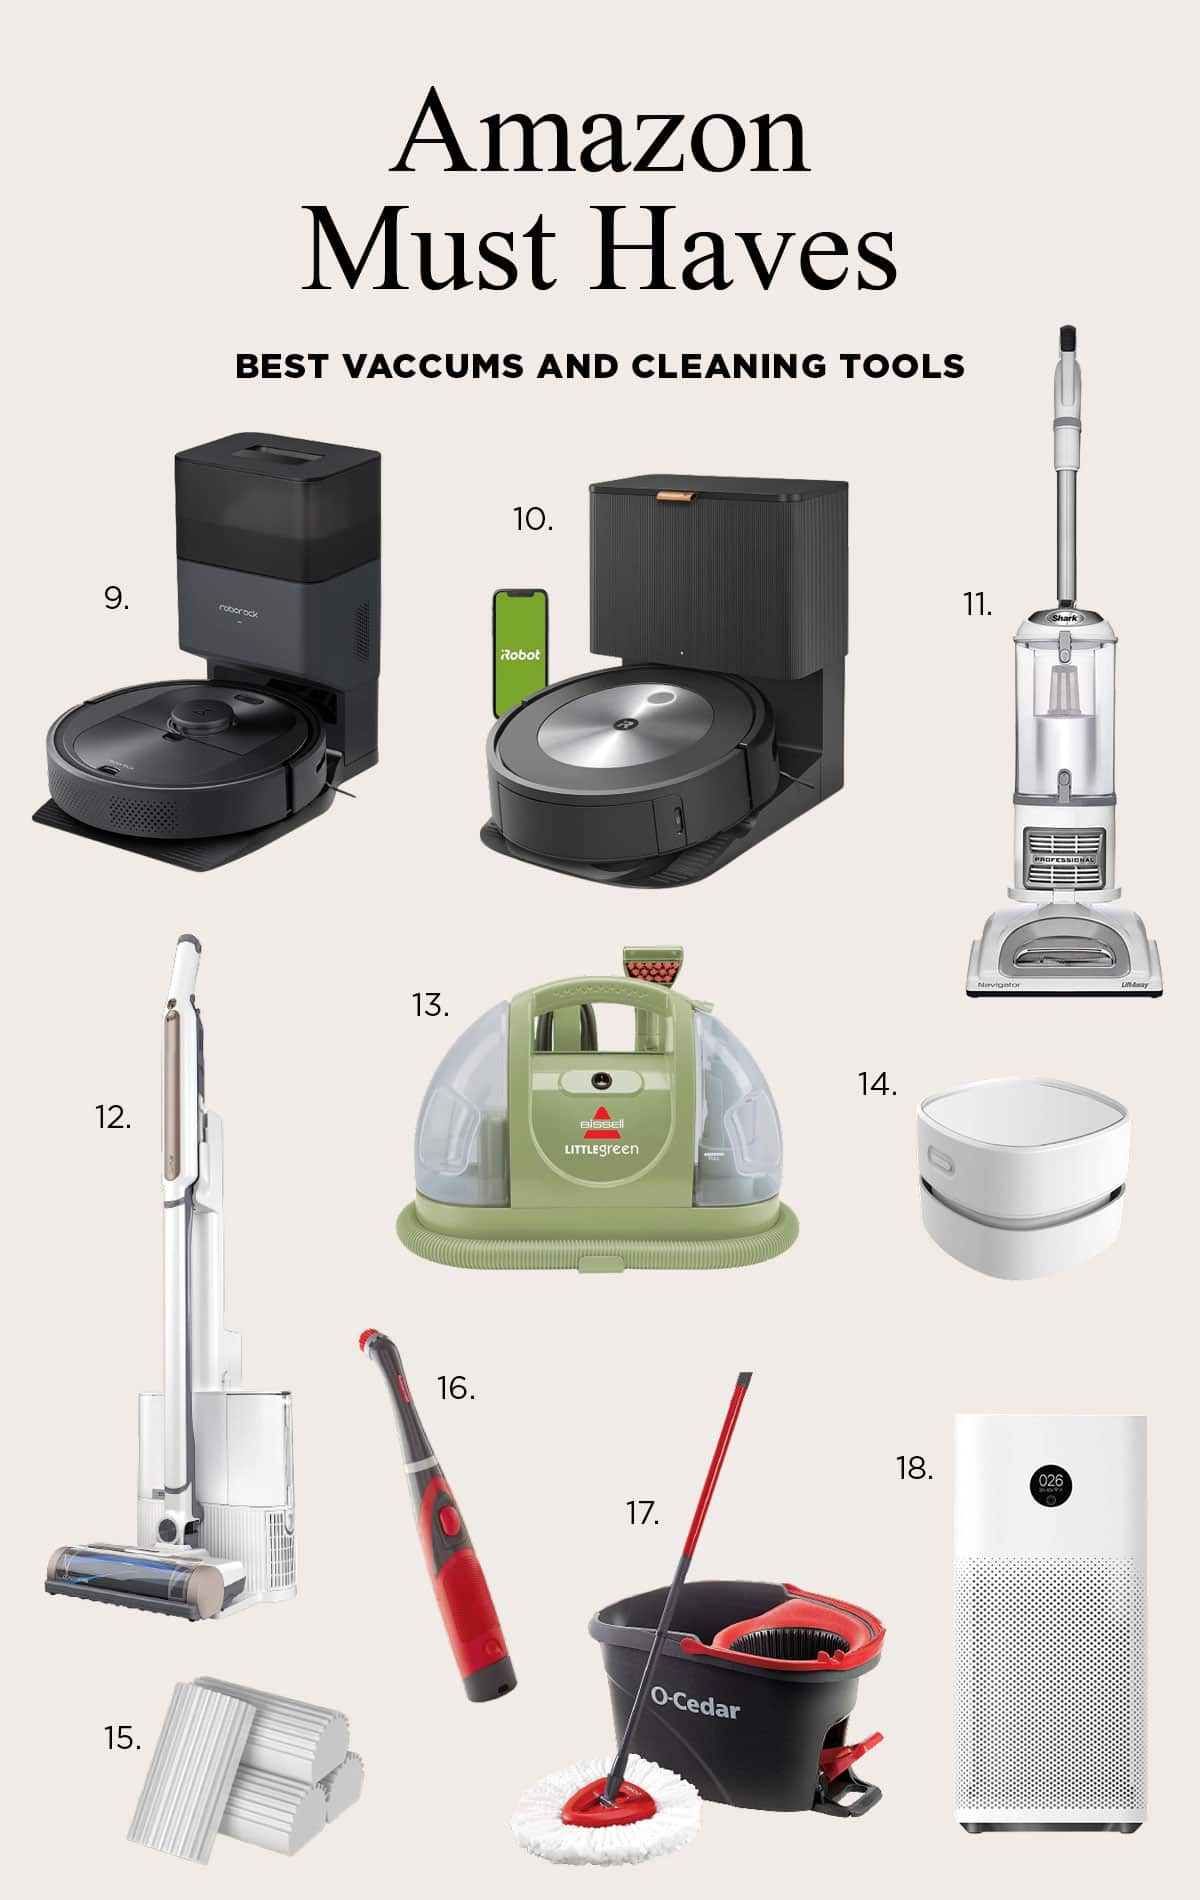 https://houseofhipsters.com/wp-content/uploads/2023/06/amazon-must-haves-vacuums-cleaning-tools.jpg